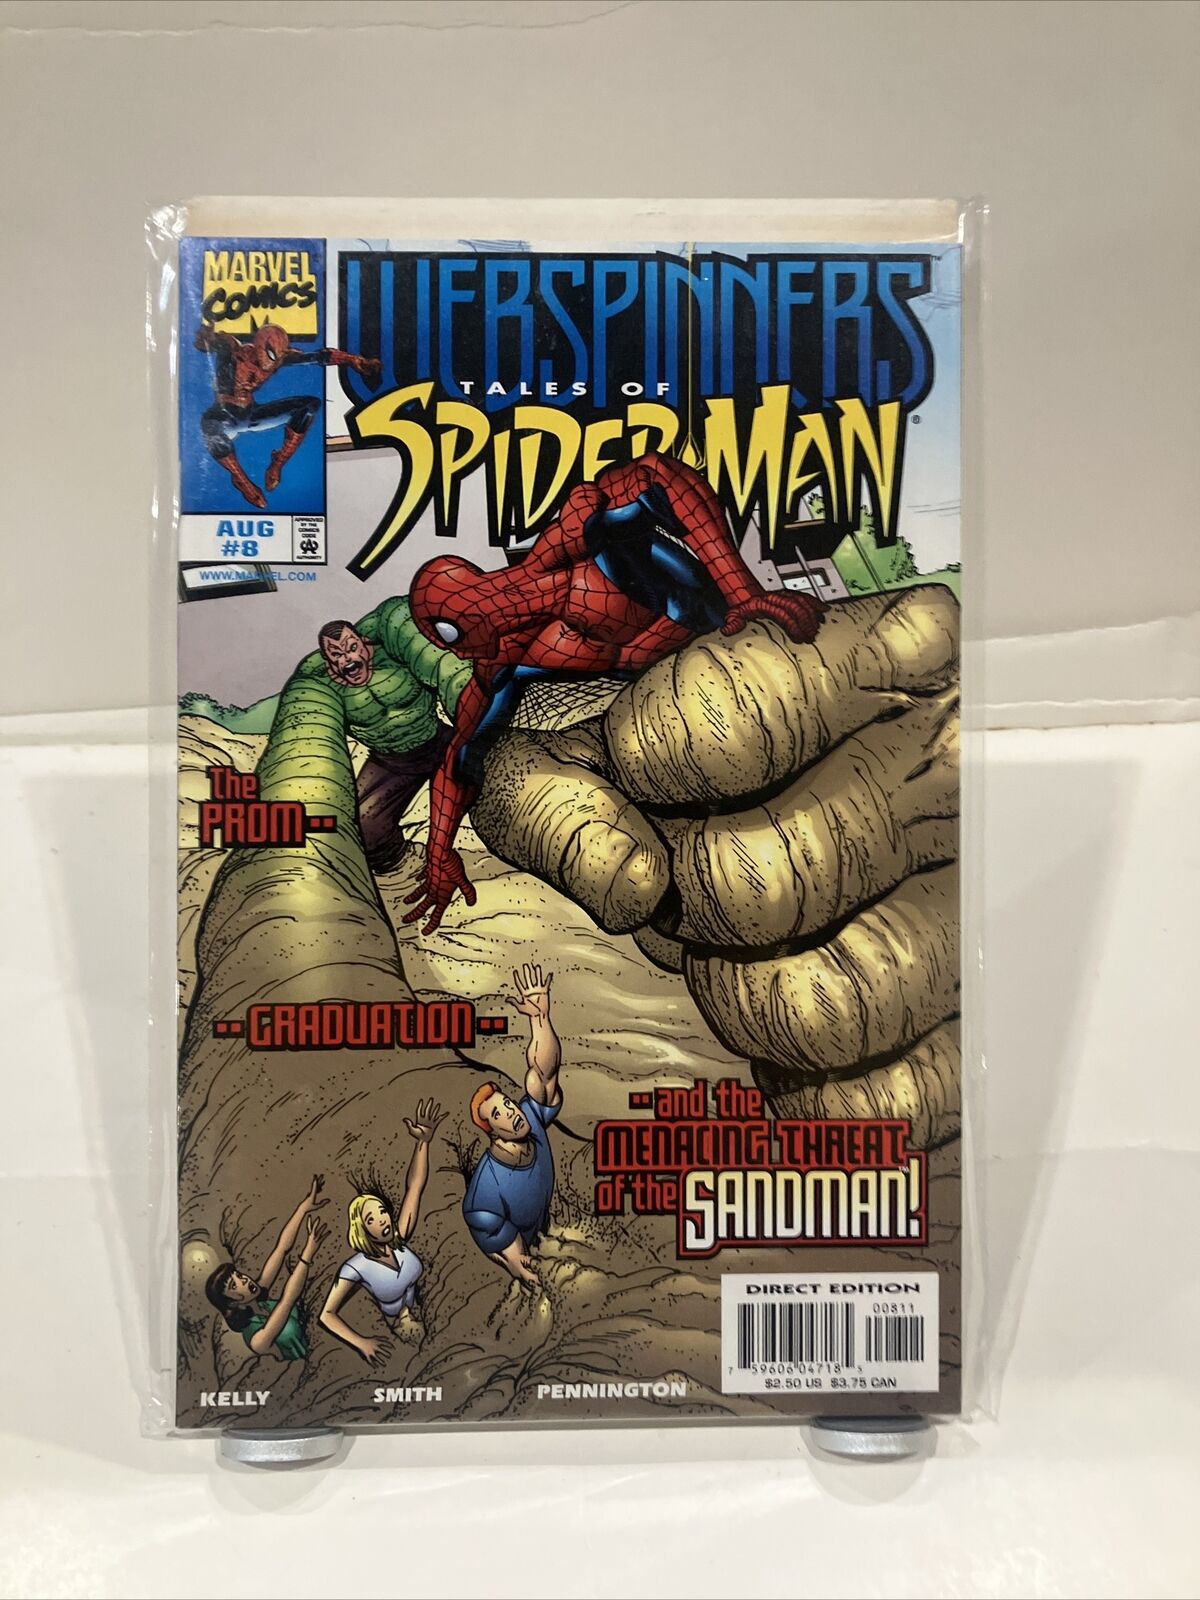 Webspinners Tales of Spider-Man #8 - Marvel Comics